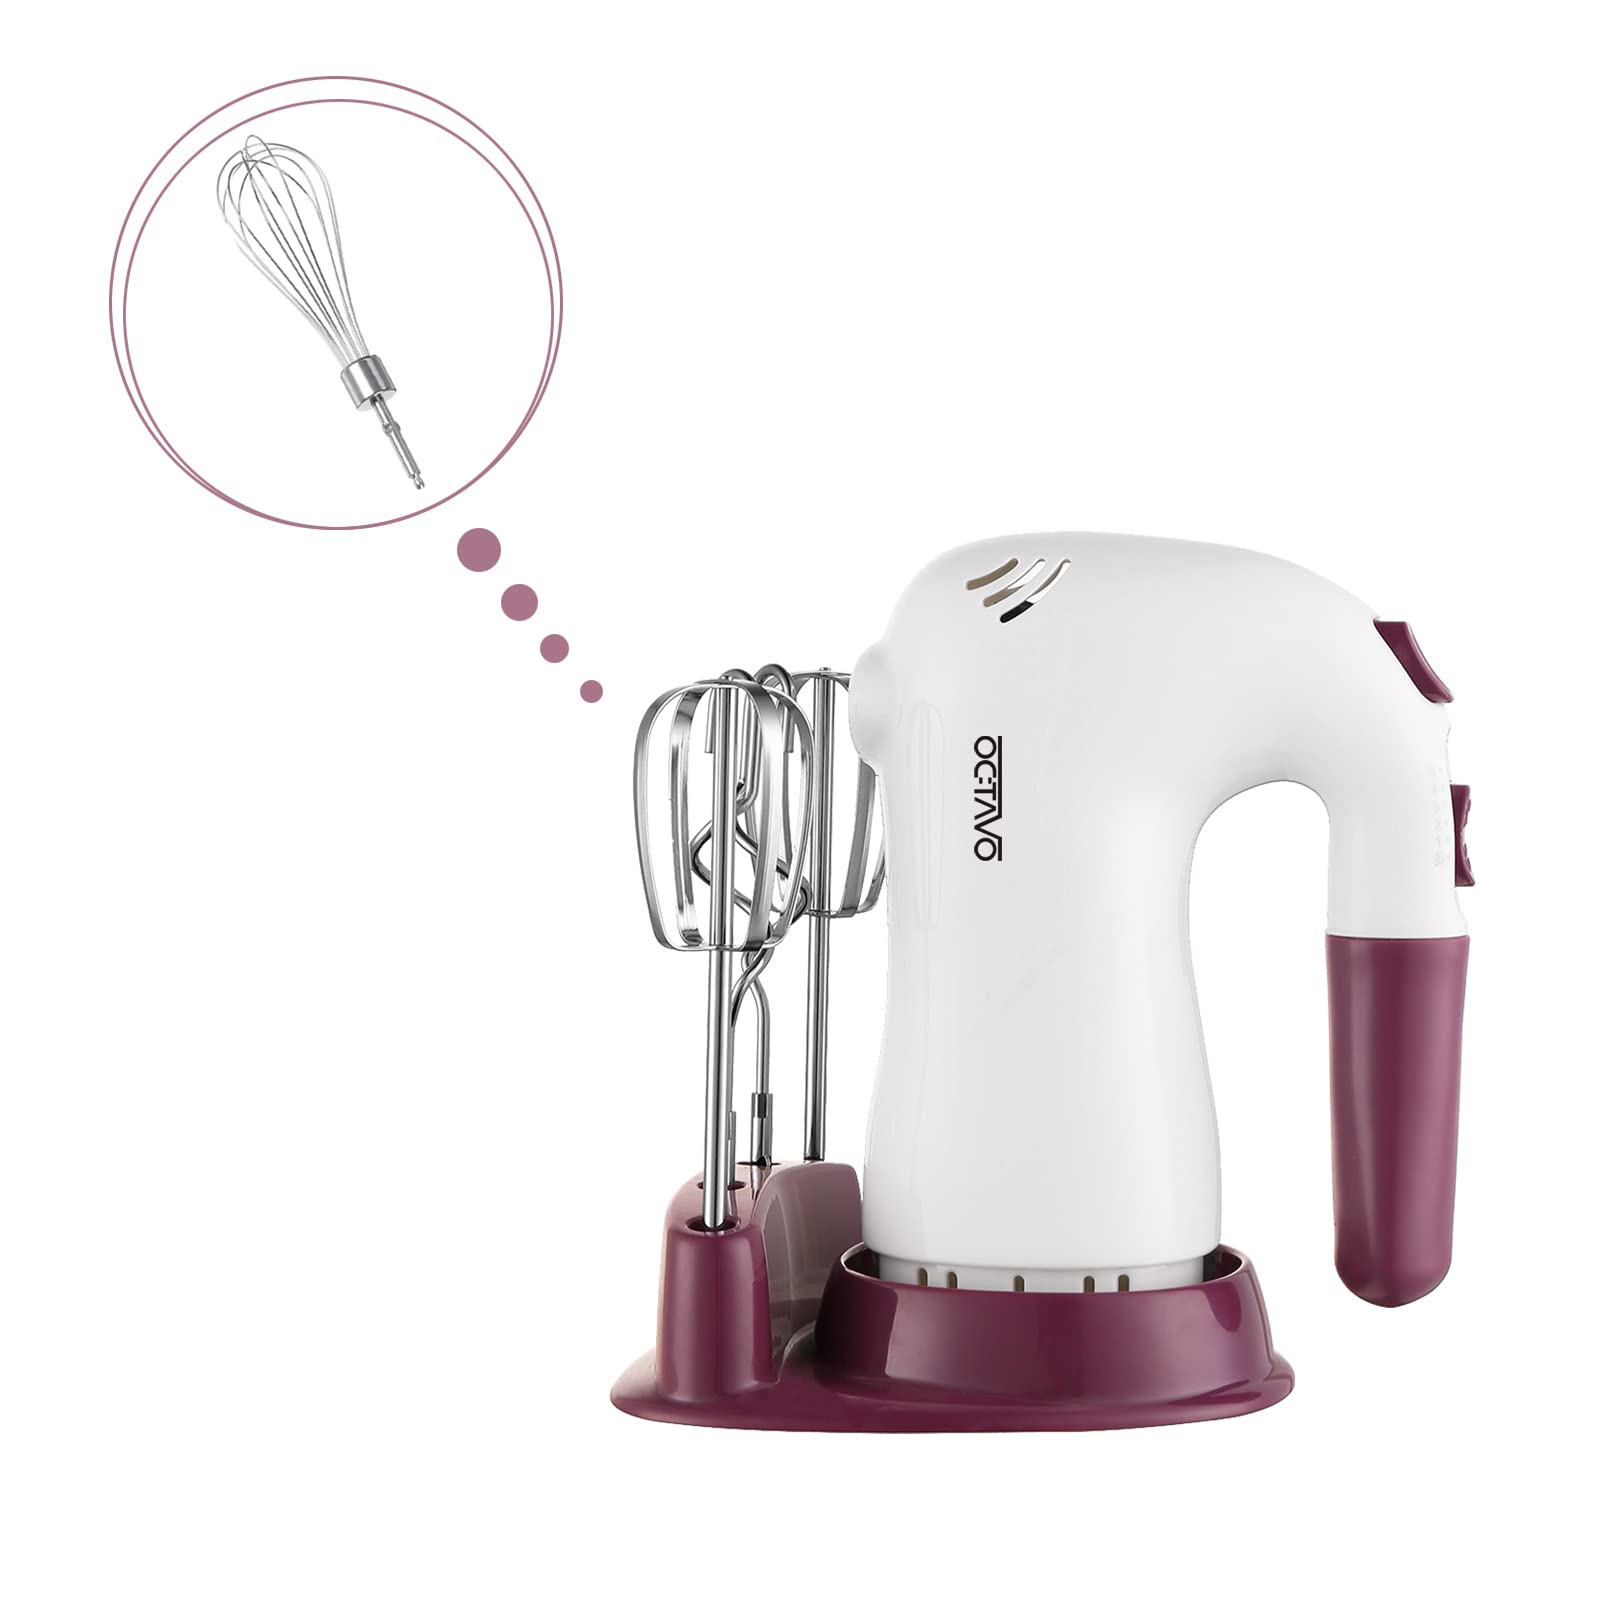 Octavo Hand Mixer Electric, 5 Speed 400W Powerful Electric Hand Mixer, Storage Base, 5 Stainless Steel Accessories, Eject Button